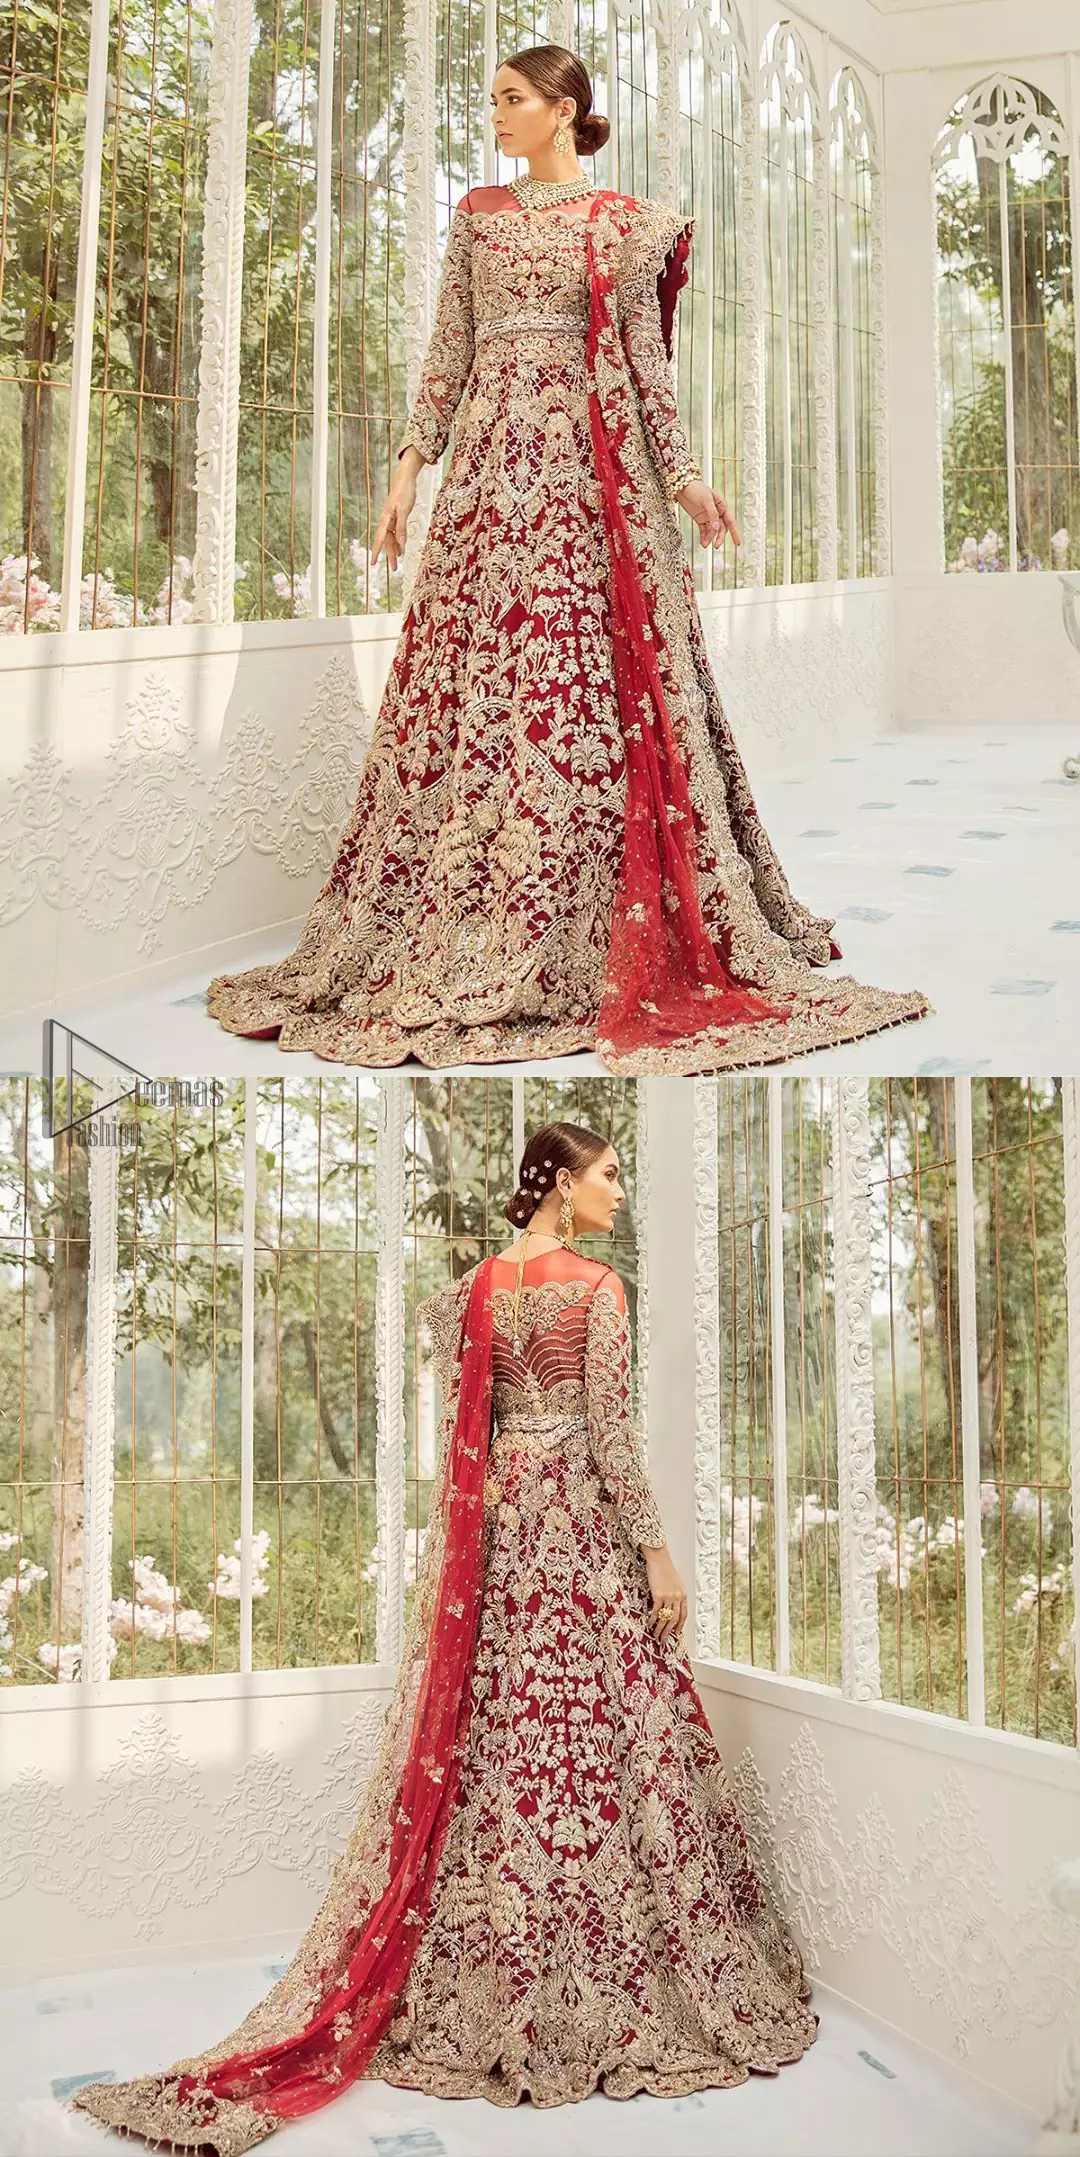 This bridal dress is perfect for your big day. Our bride makes a statement in this stunningly floraison, perfect blend of glamour and tradition with outstanding craftsmanship and gorgeous detailing. This floor length maxi is beautifully sculptured floral jhaal, floral bunches and thick scalloped hemline done with light golden kora, dabka, tilla and sequins embroidery. Exude elegance with red lehenga finessed with beautiful embellished scalloped bottom with zardosi work. The red net dupatta with chann and finishing all around the edges makes the look complete.
